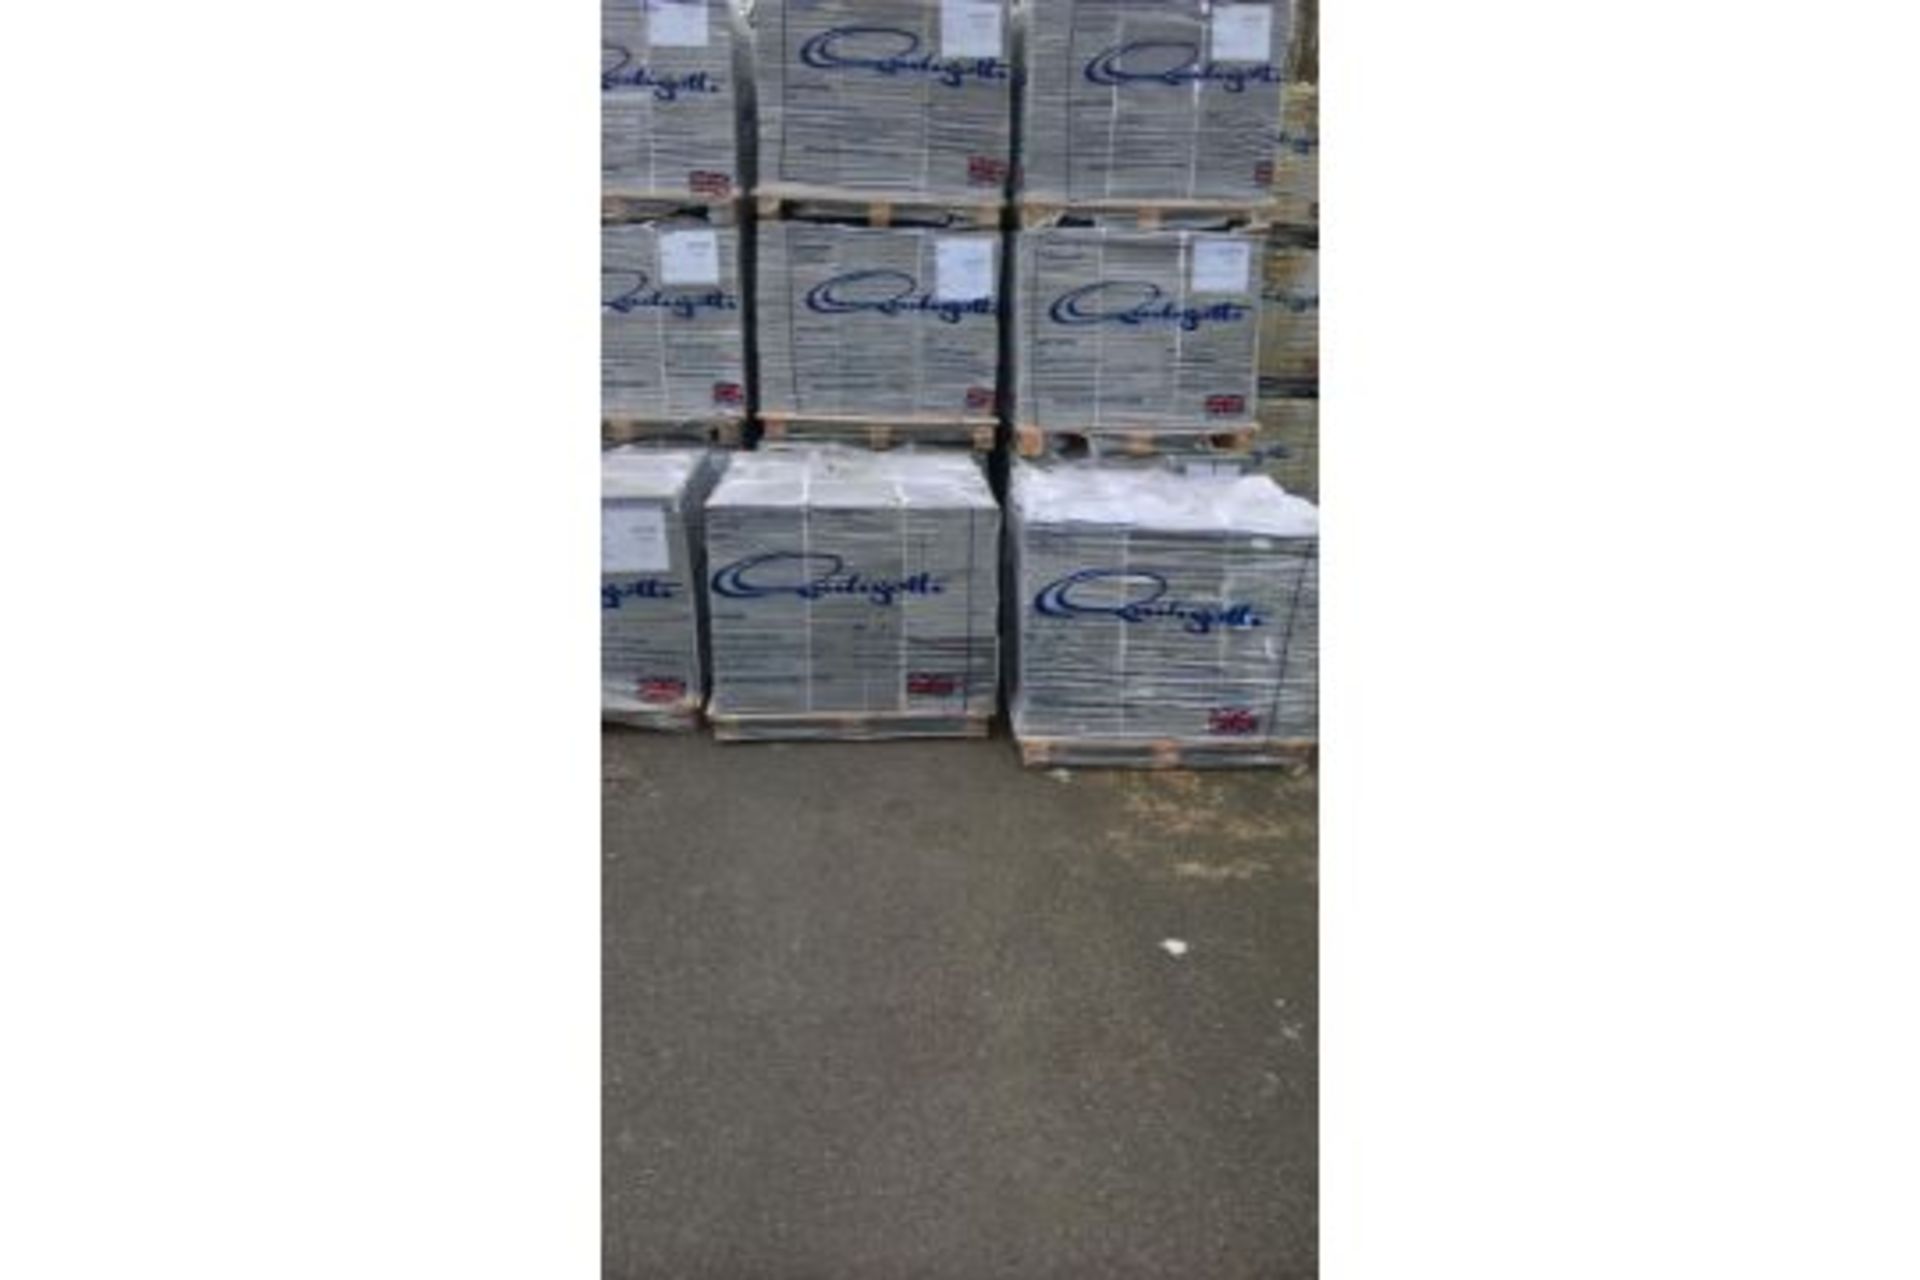 1 PALLET OF BRAND NEW GREY TERRAZZO COMMERCIAL TILES Z30099, COVERS 24 SQUARE YARDS *PLUS VAT* - Image 3 of 6